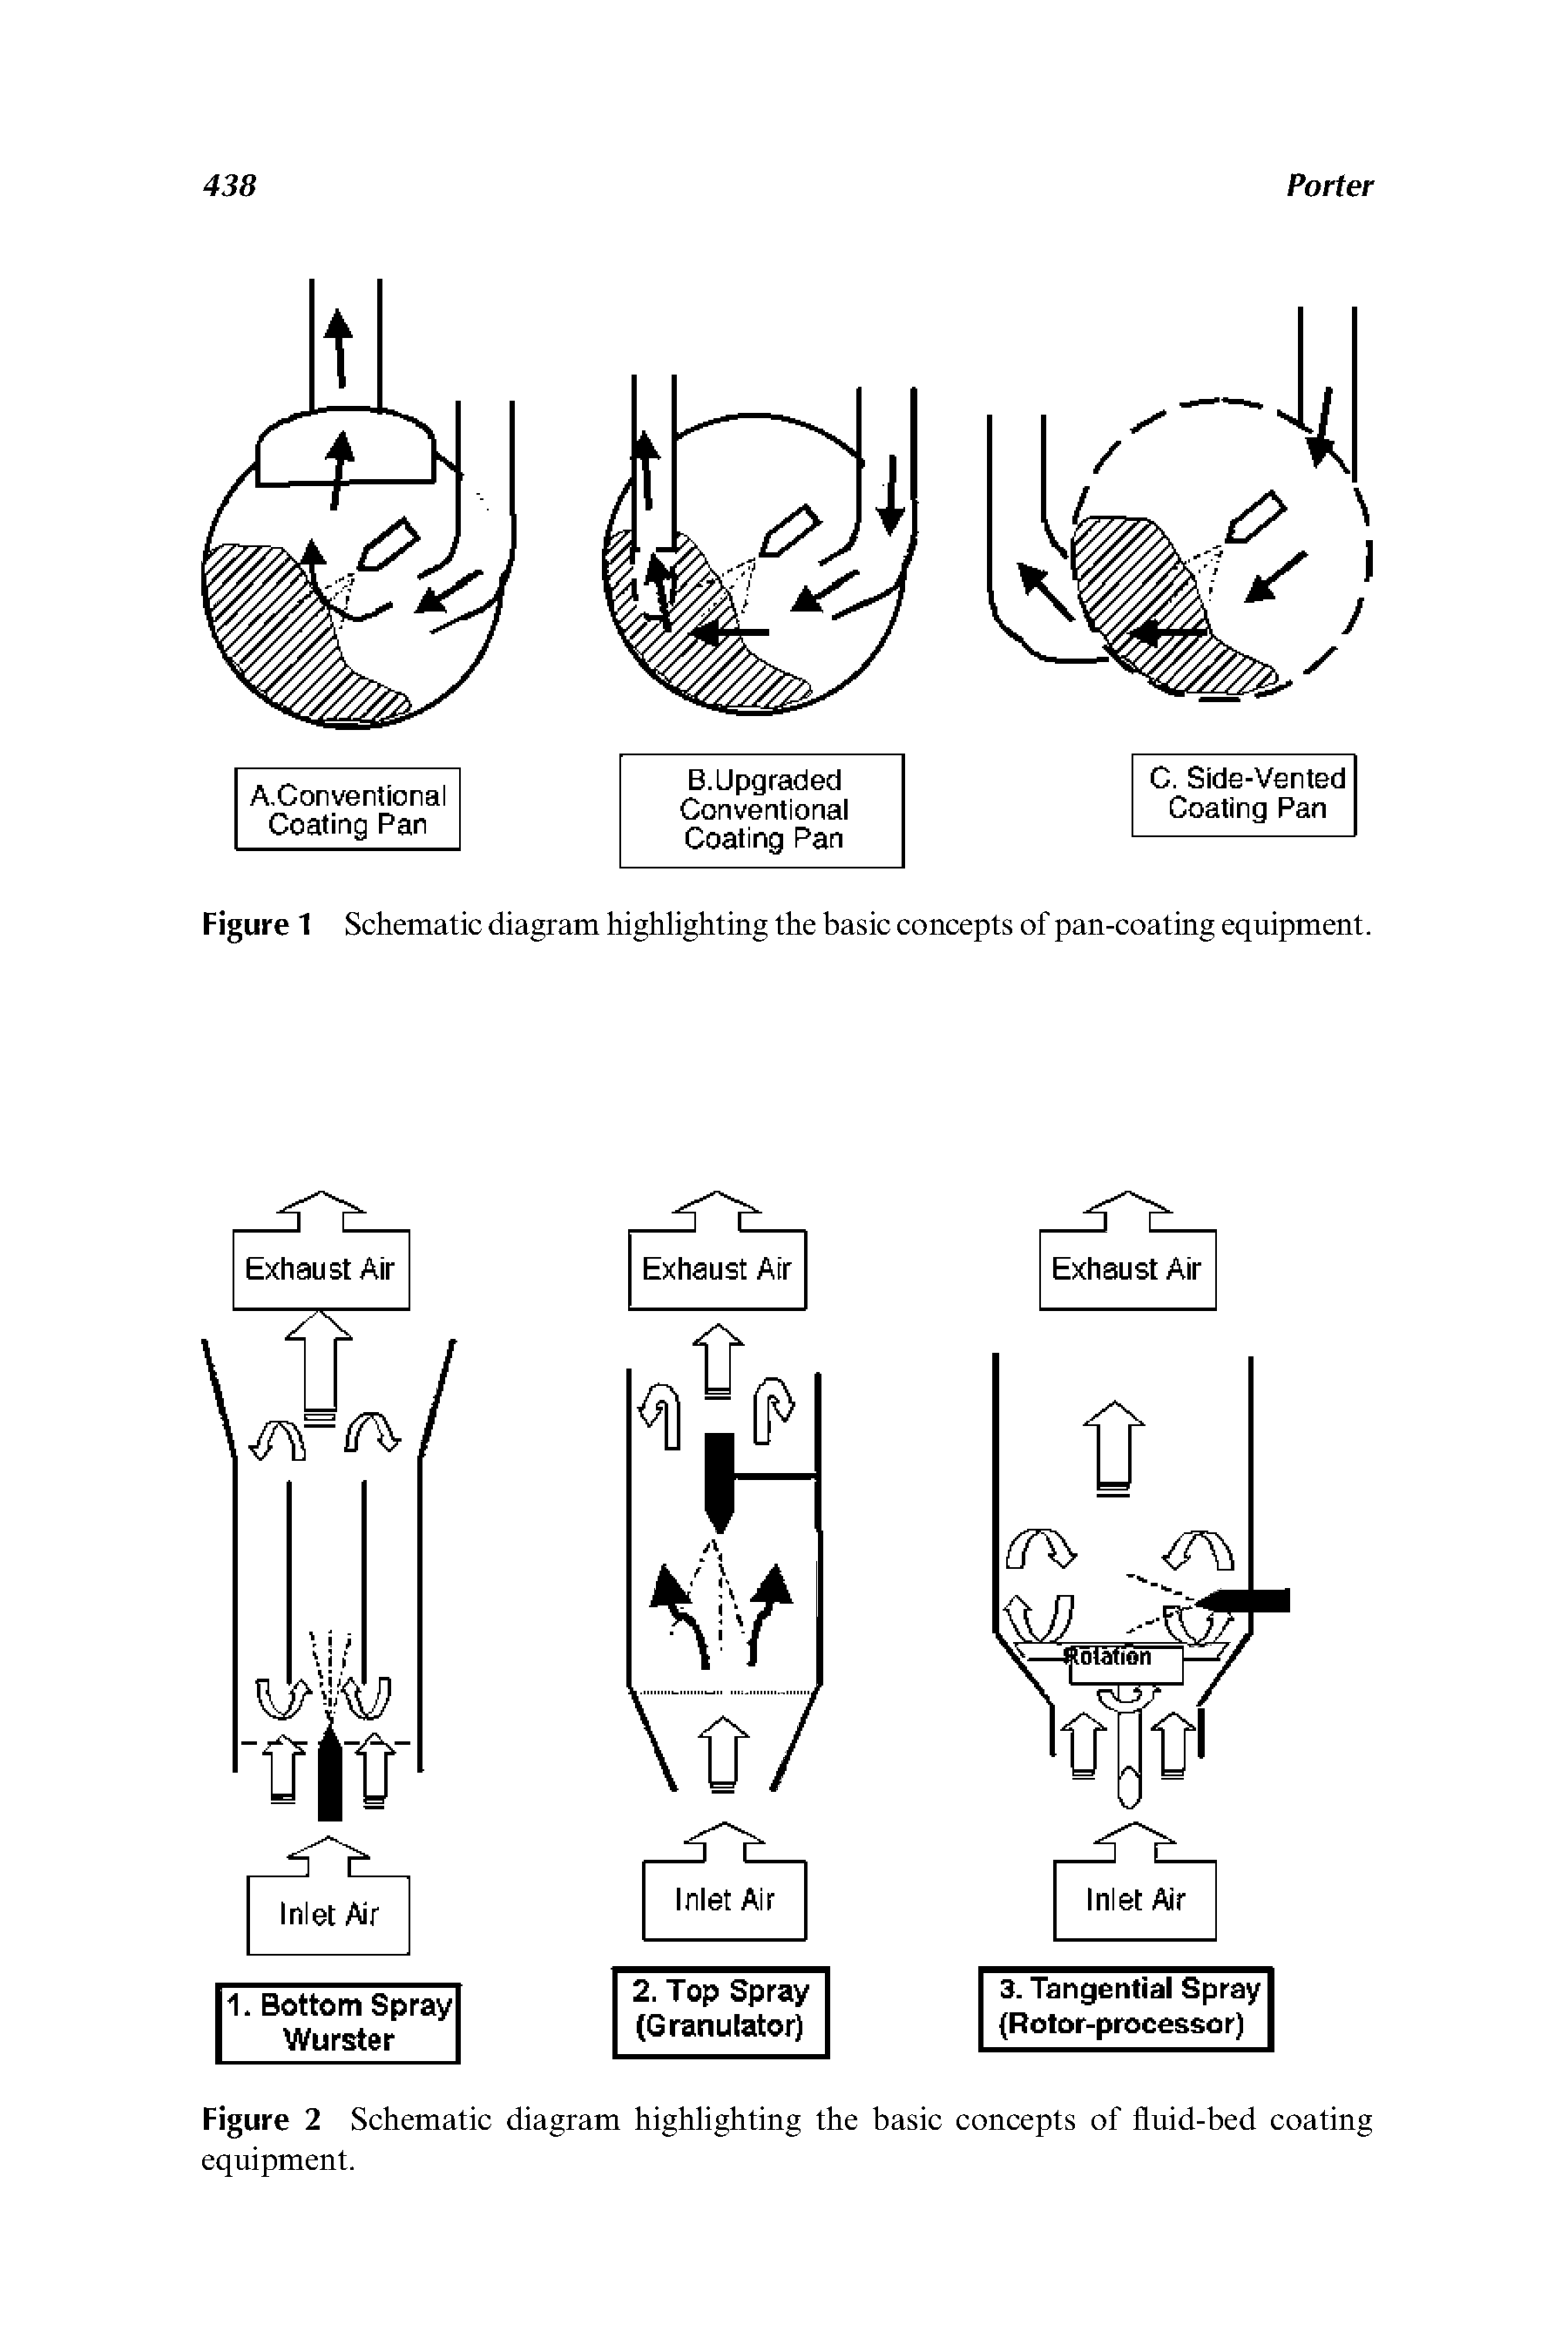 Figure 2 Schematic diagram highlighting the basic concepts of fluid-bed coating equipment.